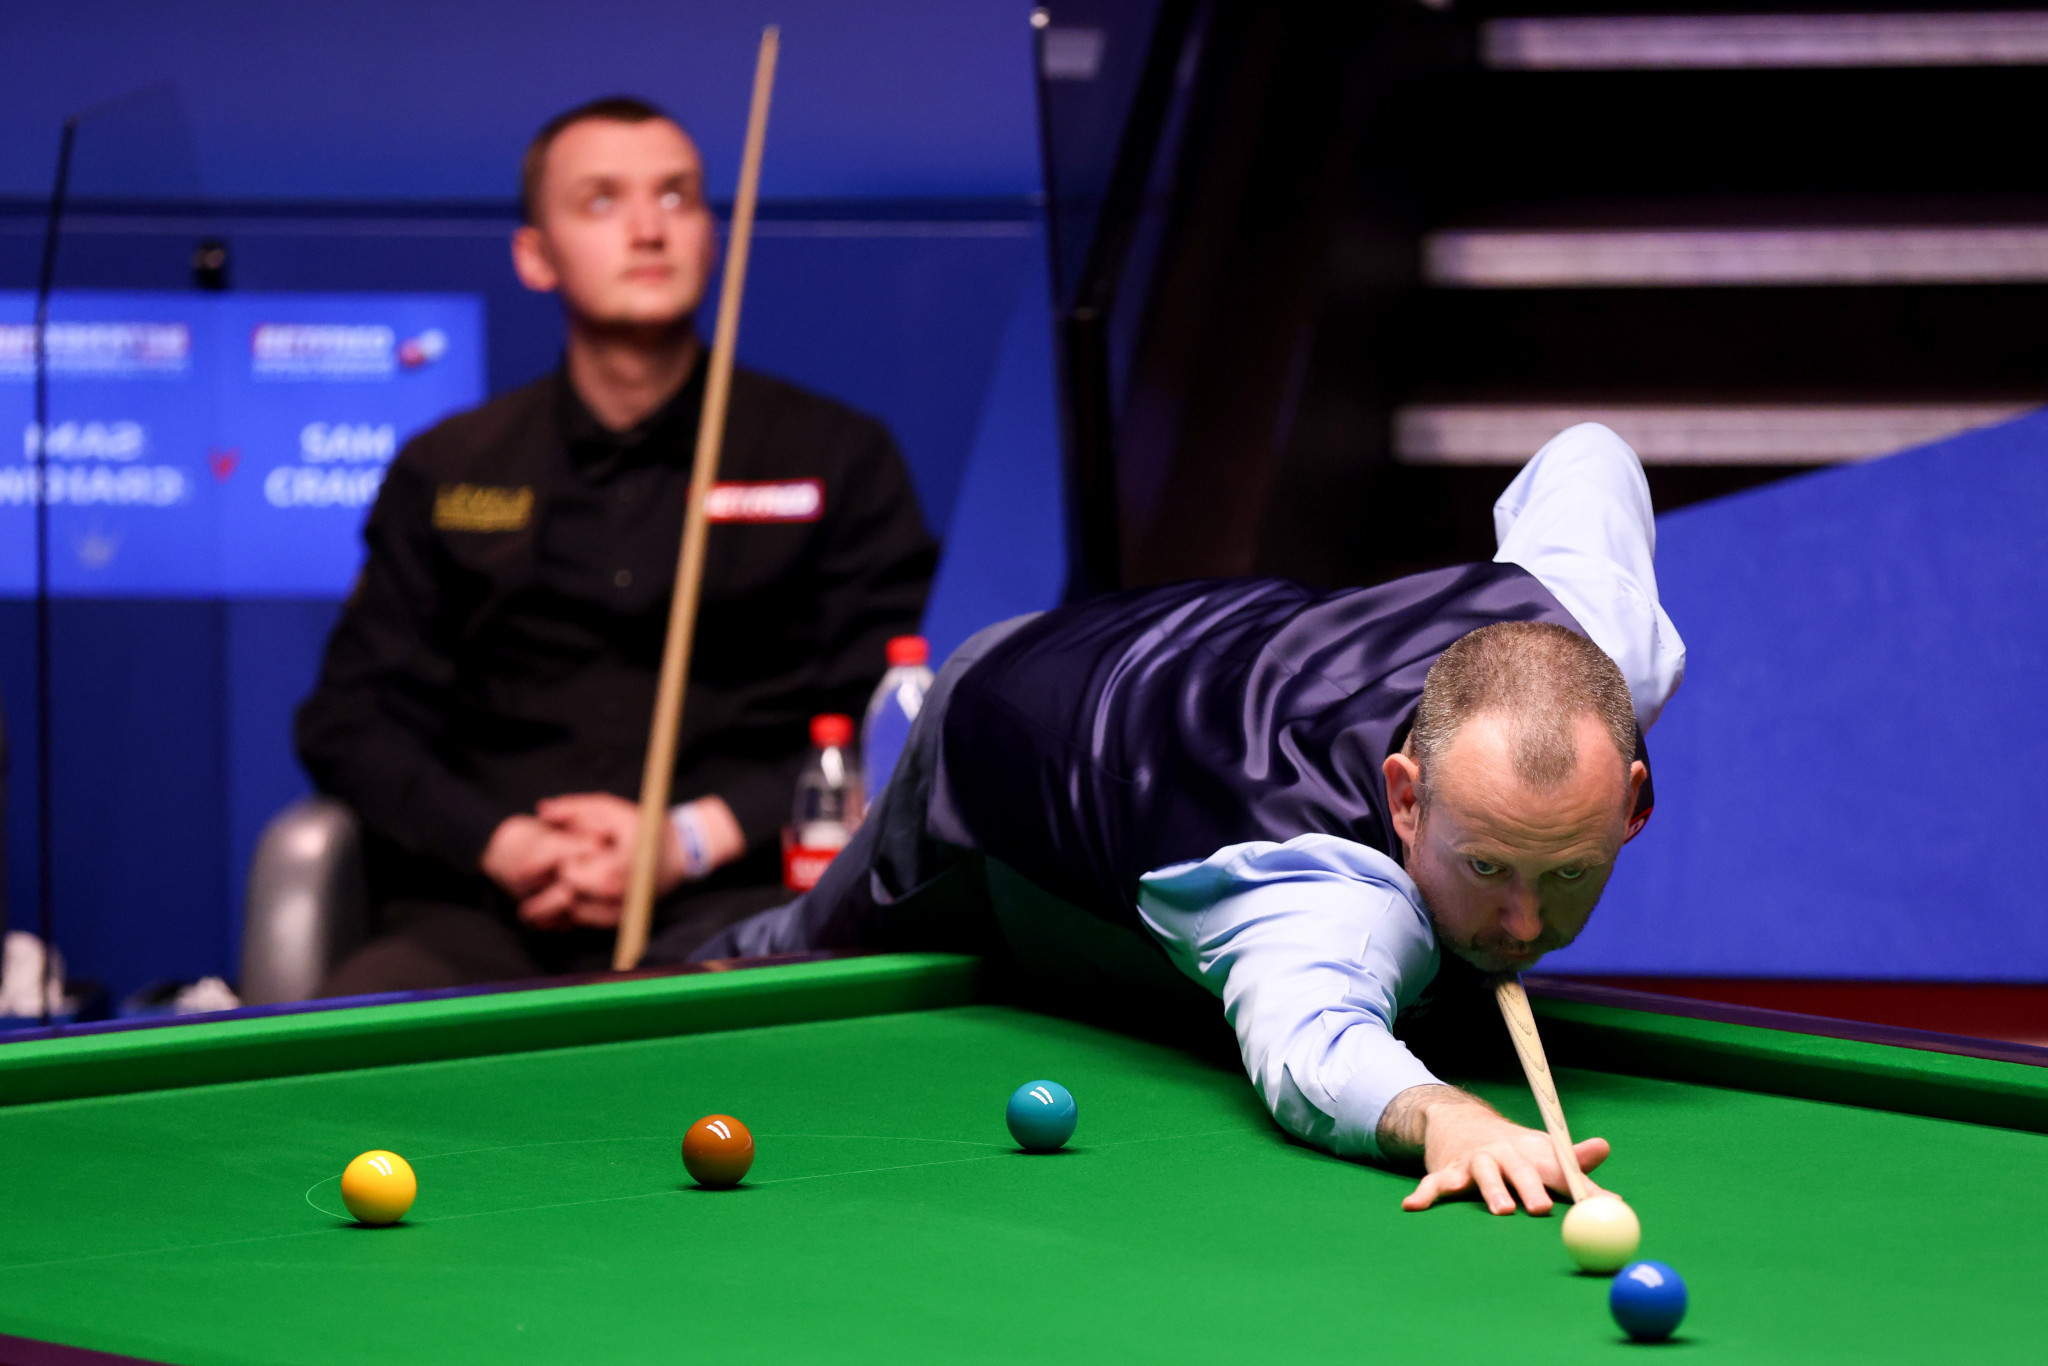 Mark Williams of Wales will face John Higgins in a rematch of the 2018 final, after he beat Crucible debutant Sam Craigie ©Getty Images